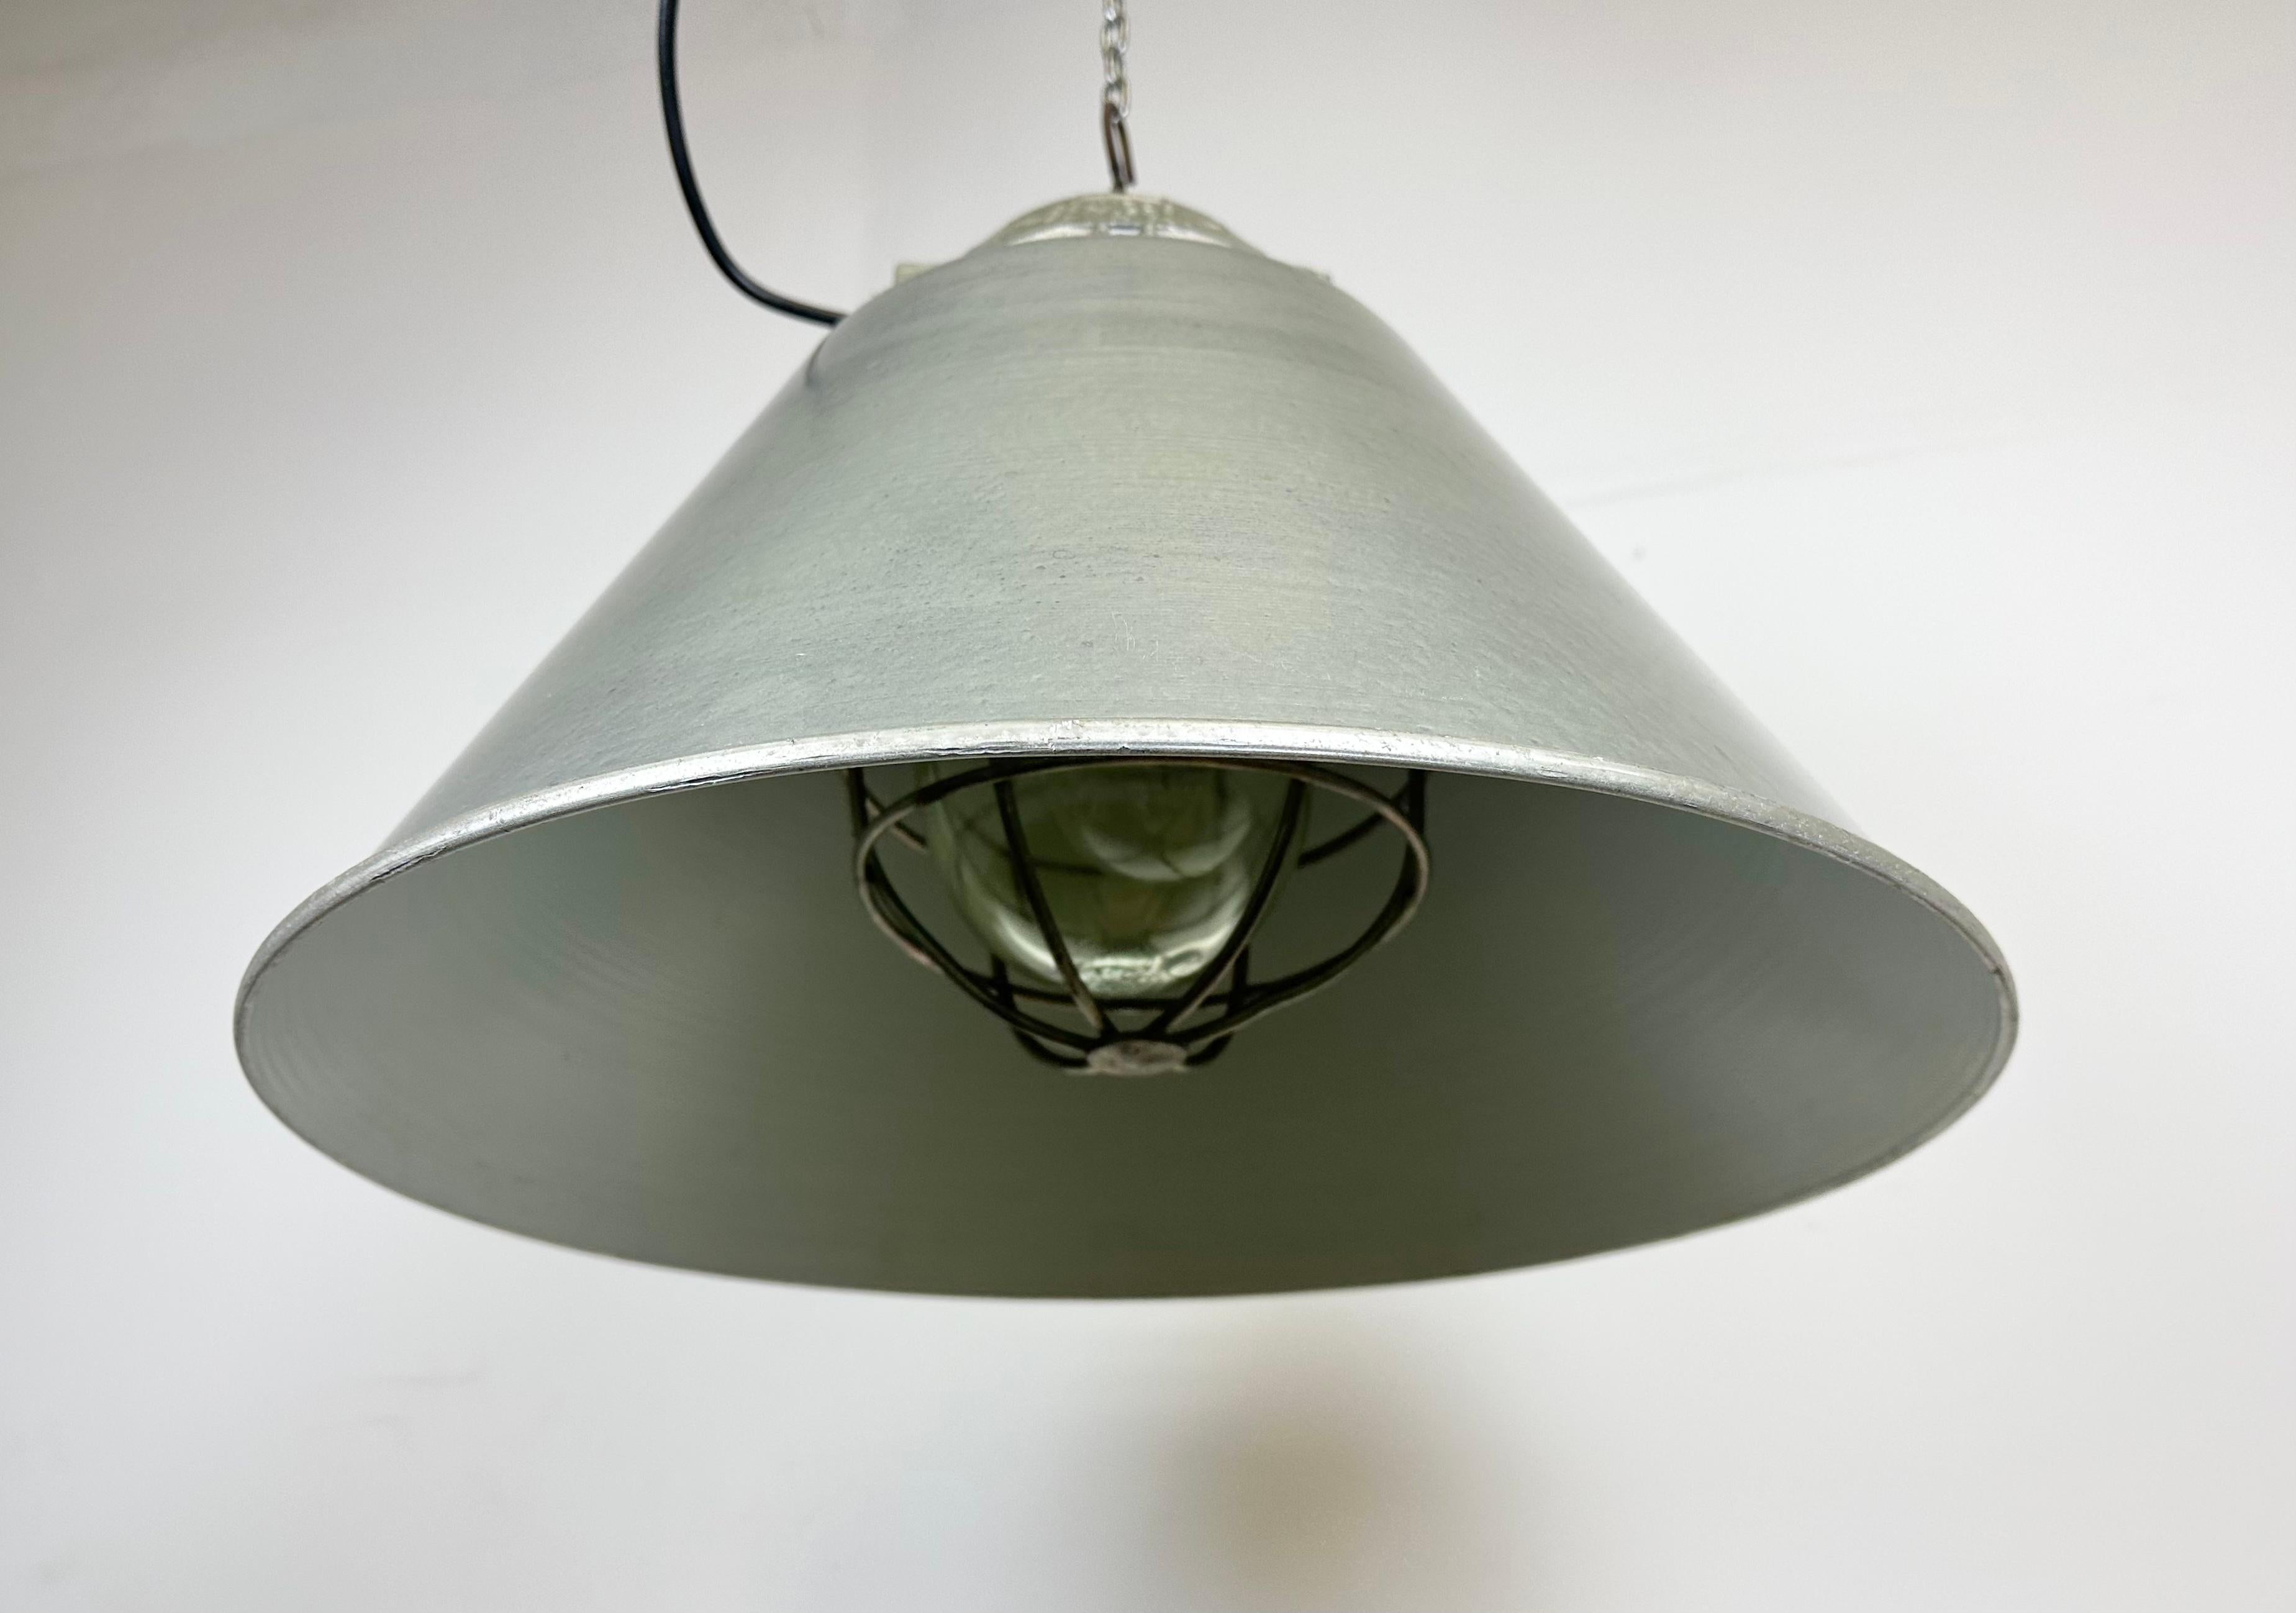 Grey Industrial Explosion Proof Lamp with Aluminum Shade from Zaos, 1970s For Sale 2